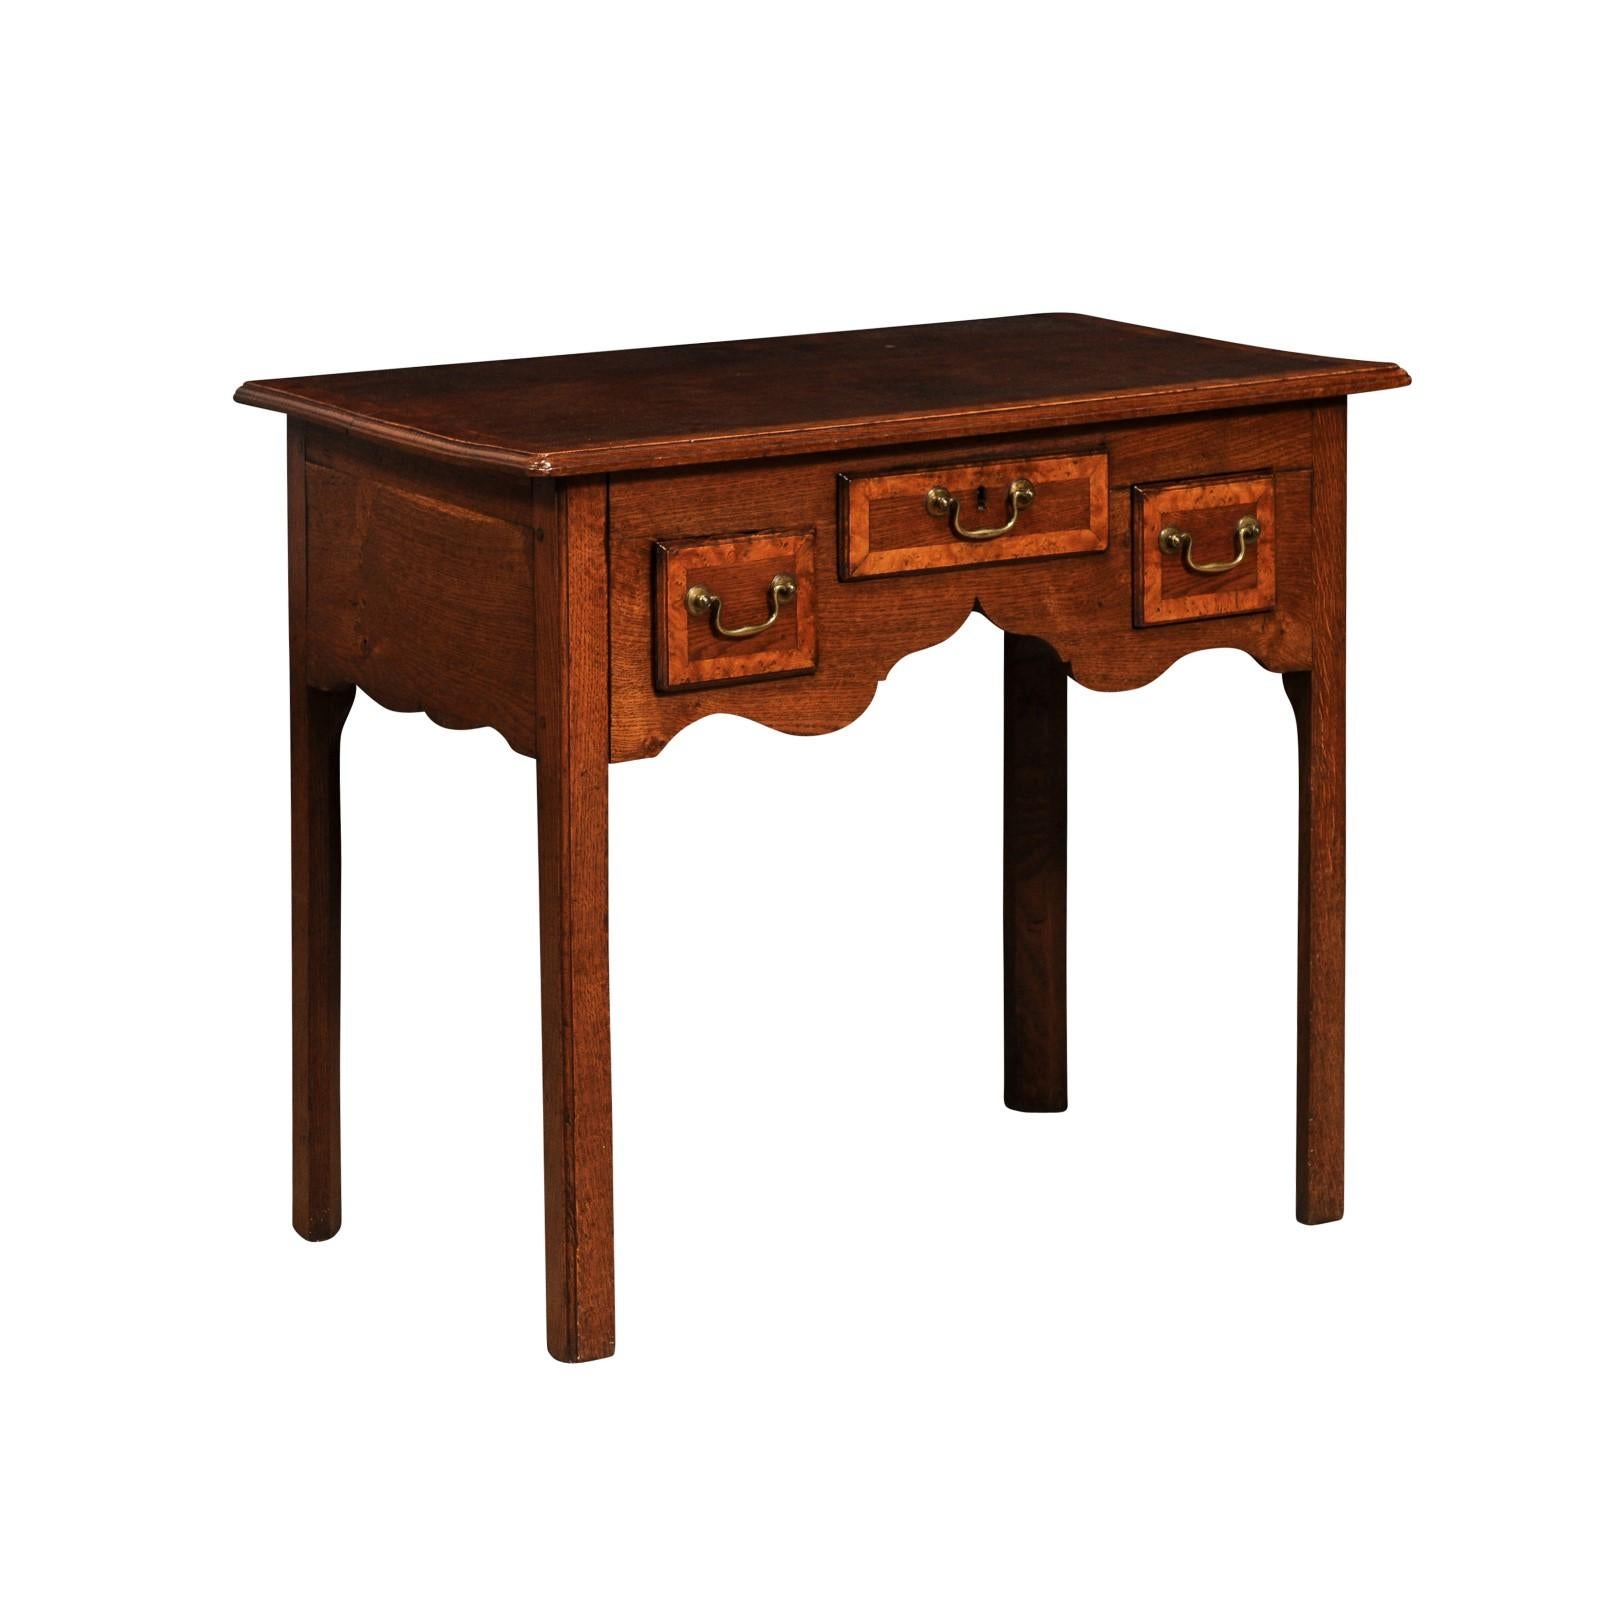 An English Georgian period oak lowboy side table from the 18th century with three drawers, carved apron, cross-banded accents and straight legs. This English Georgian period oak lowboy side table, dating back to the 18th century, is a classic piece,